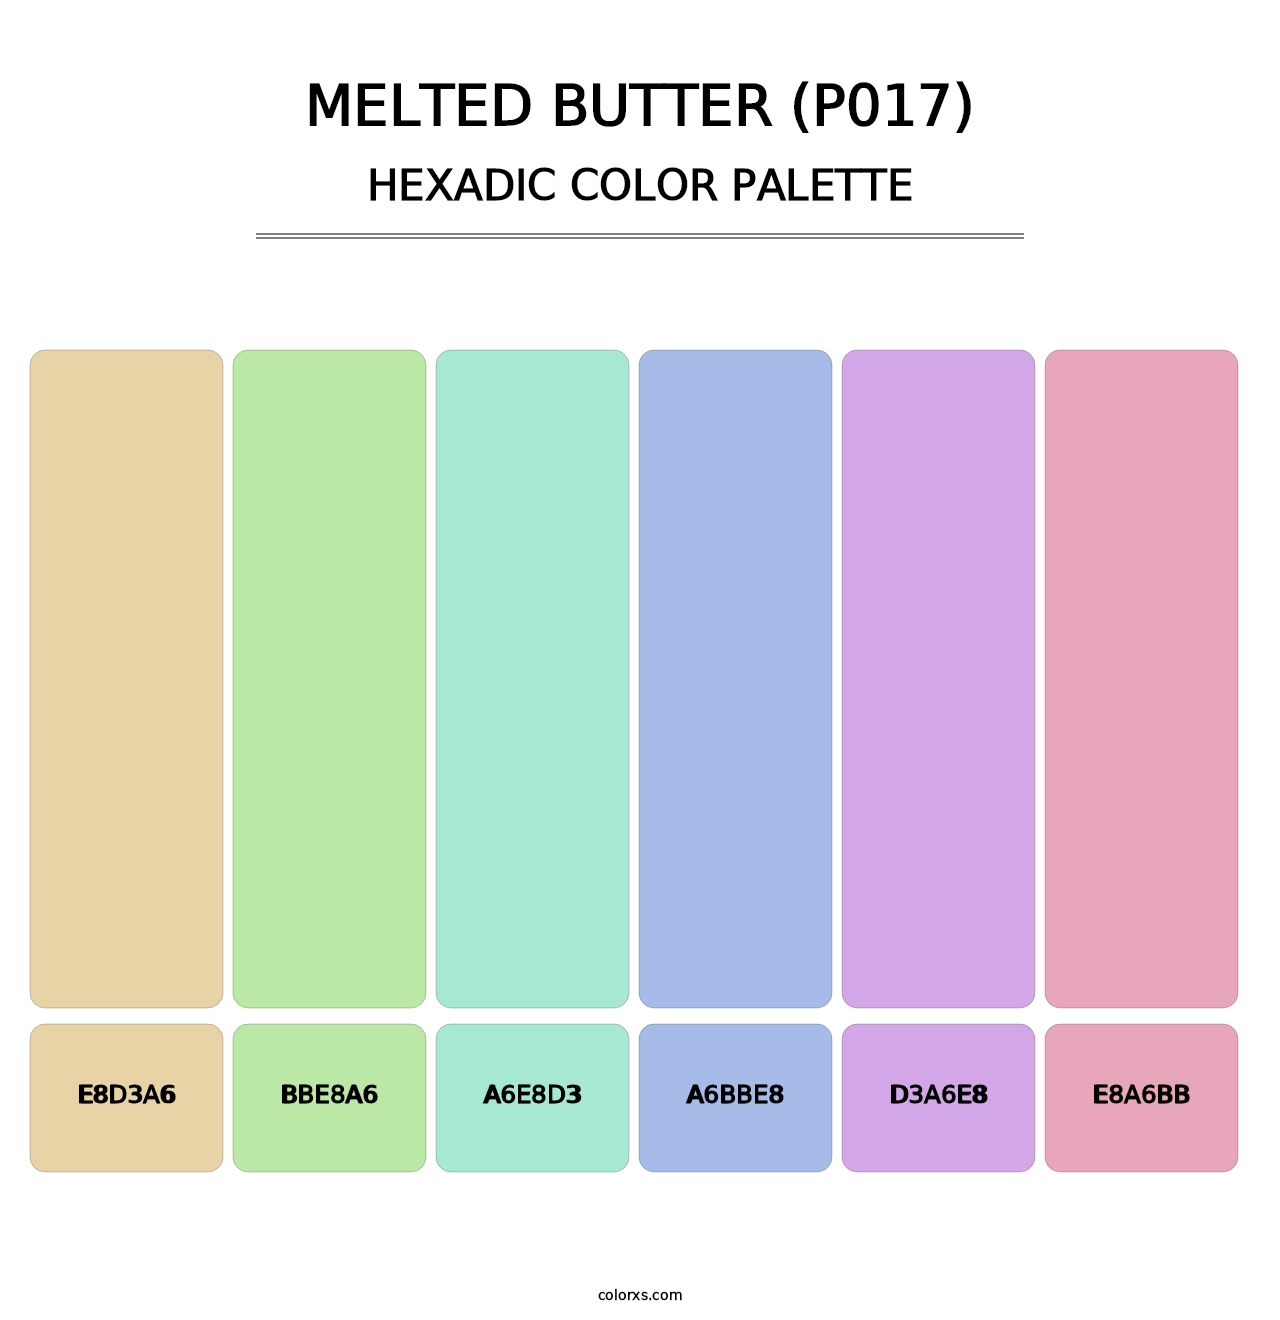 Melted Butter (P017) - Hexadic Color Palette